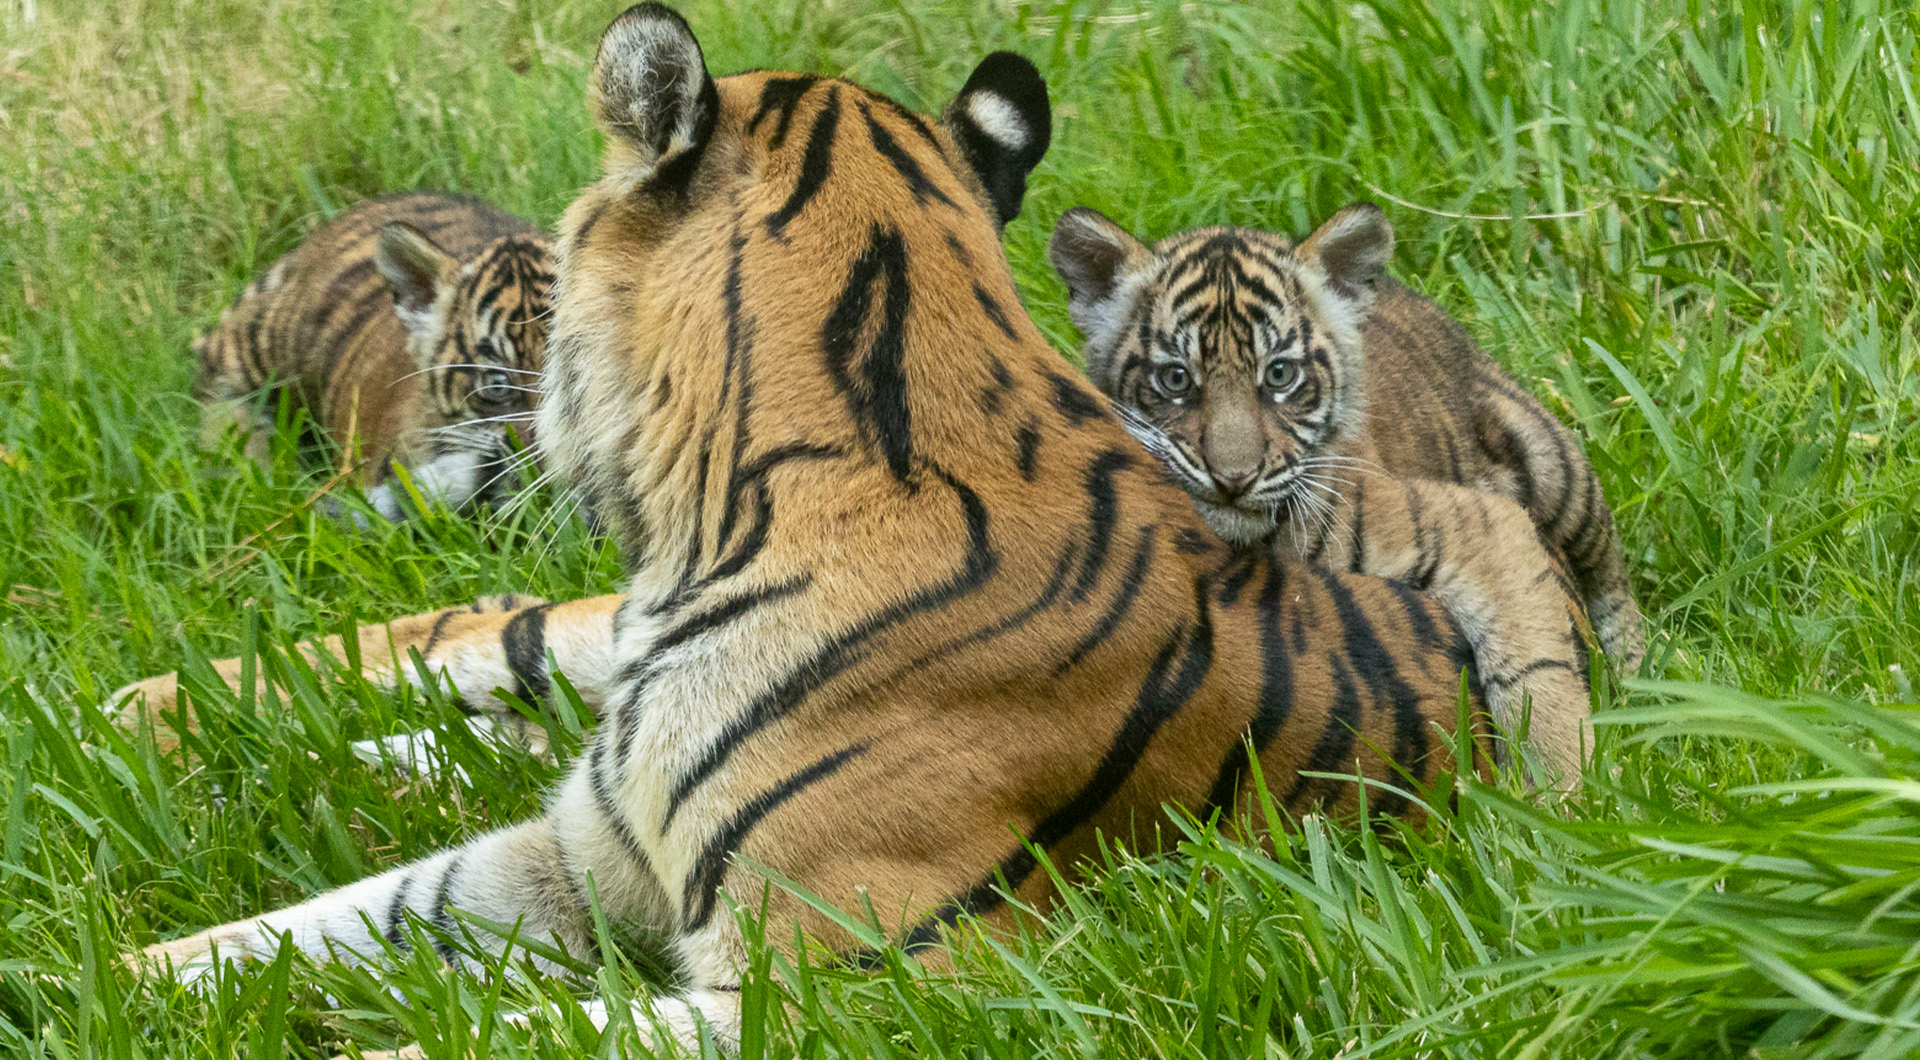 Two tiger cubs and their mother play in a field of grass.